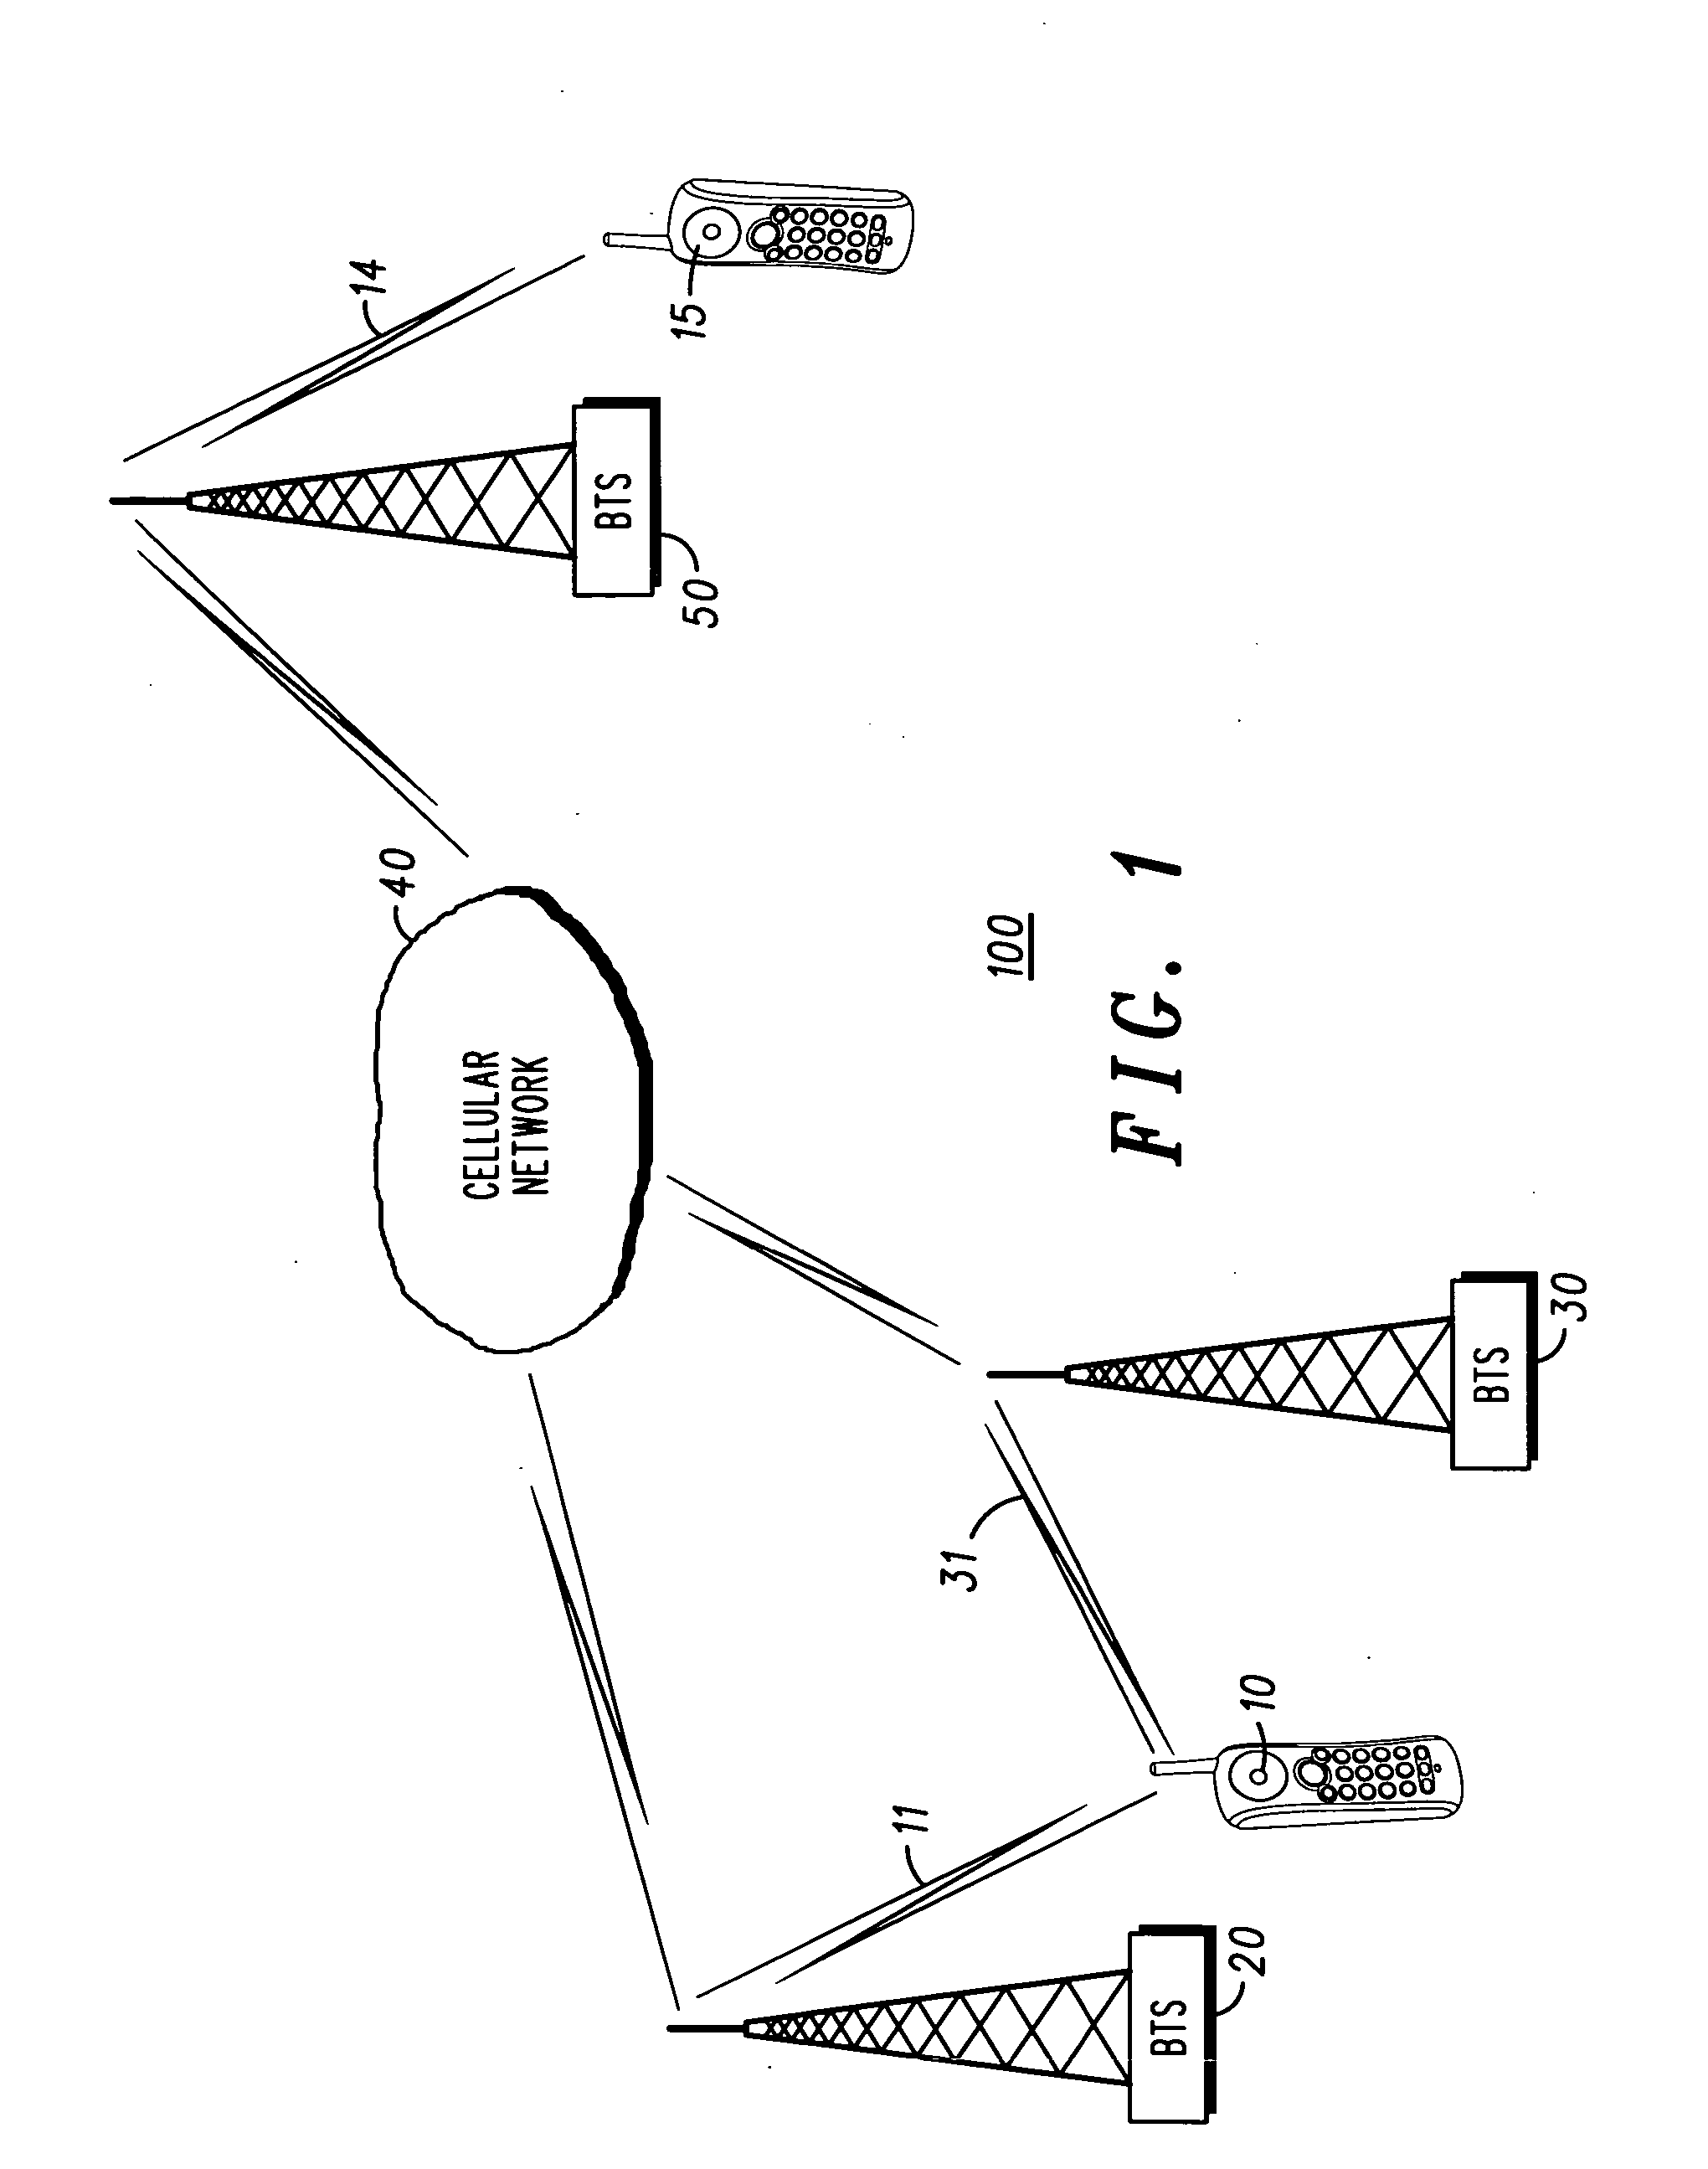 Method for adaptive channel signaling